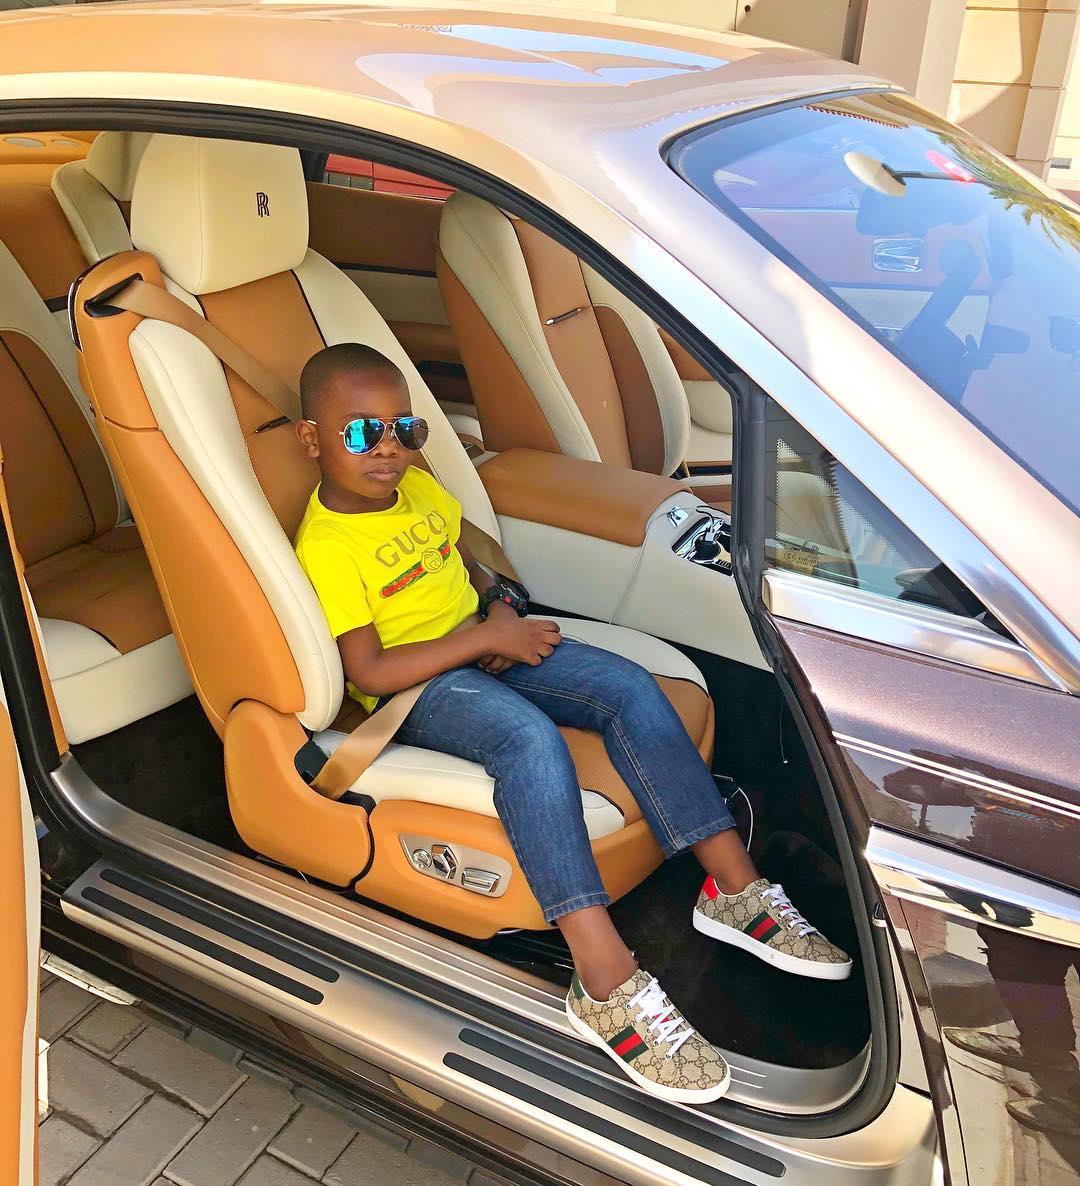 Meet Mompha Junior, world’s youngest billionaire who owns private jets and luxurious cars